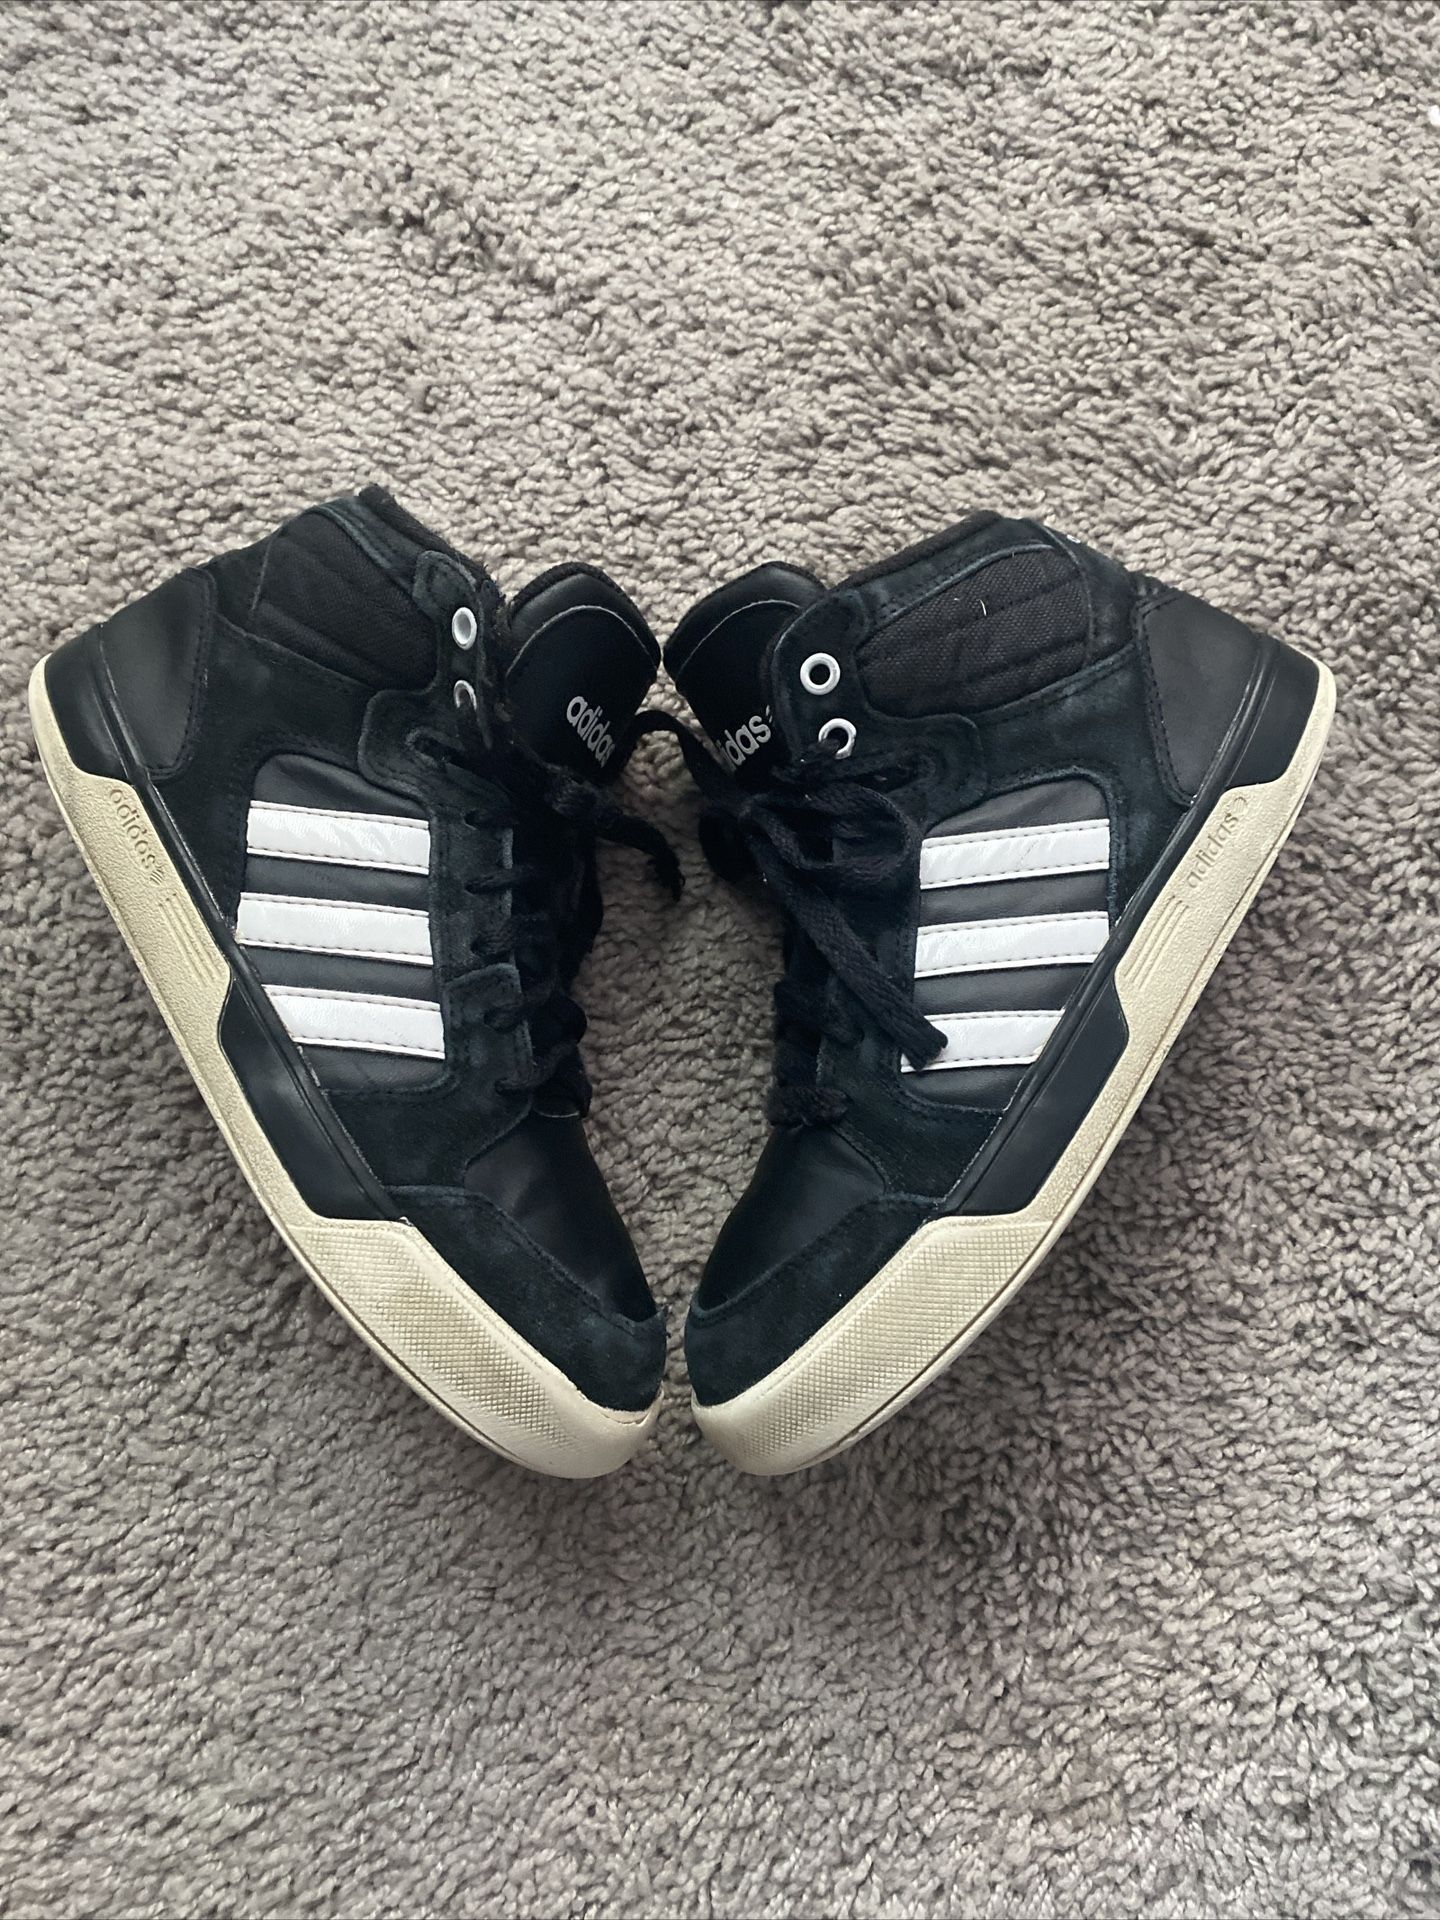 Adidas Sneakers Size 6US